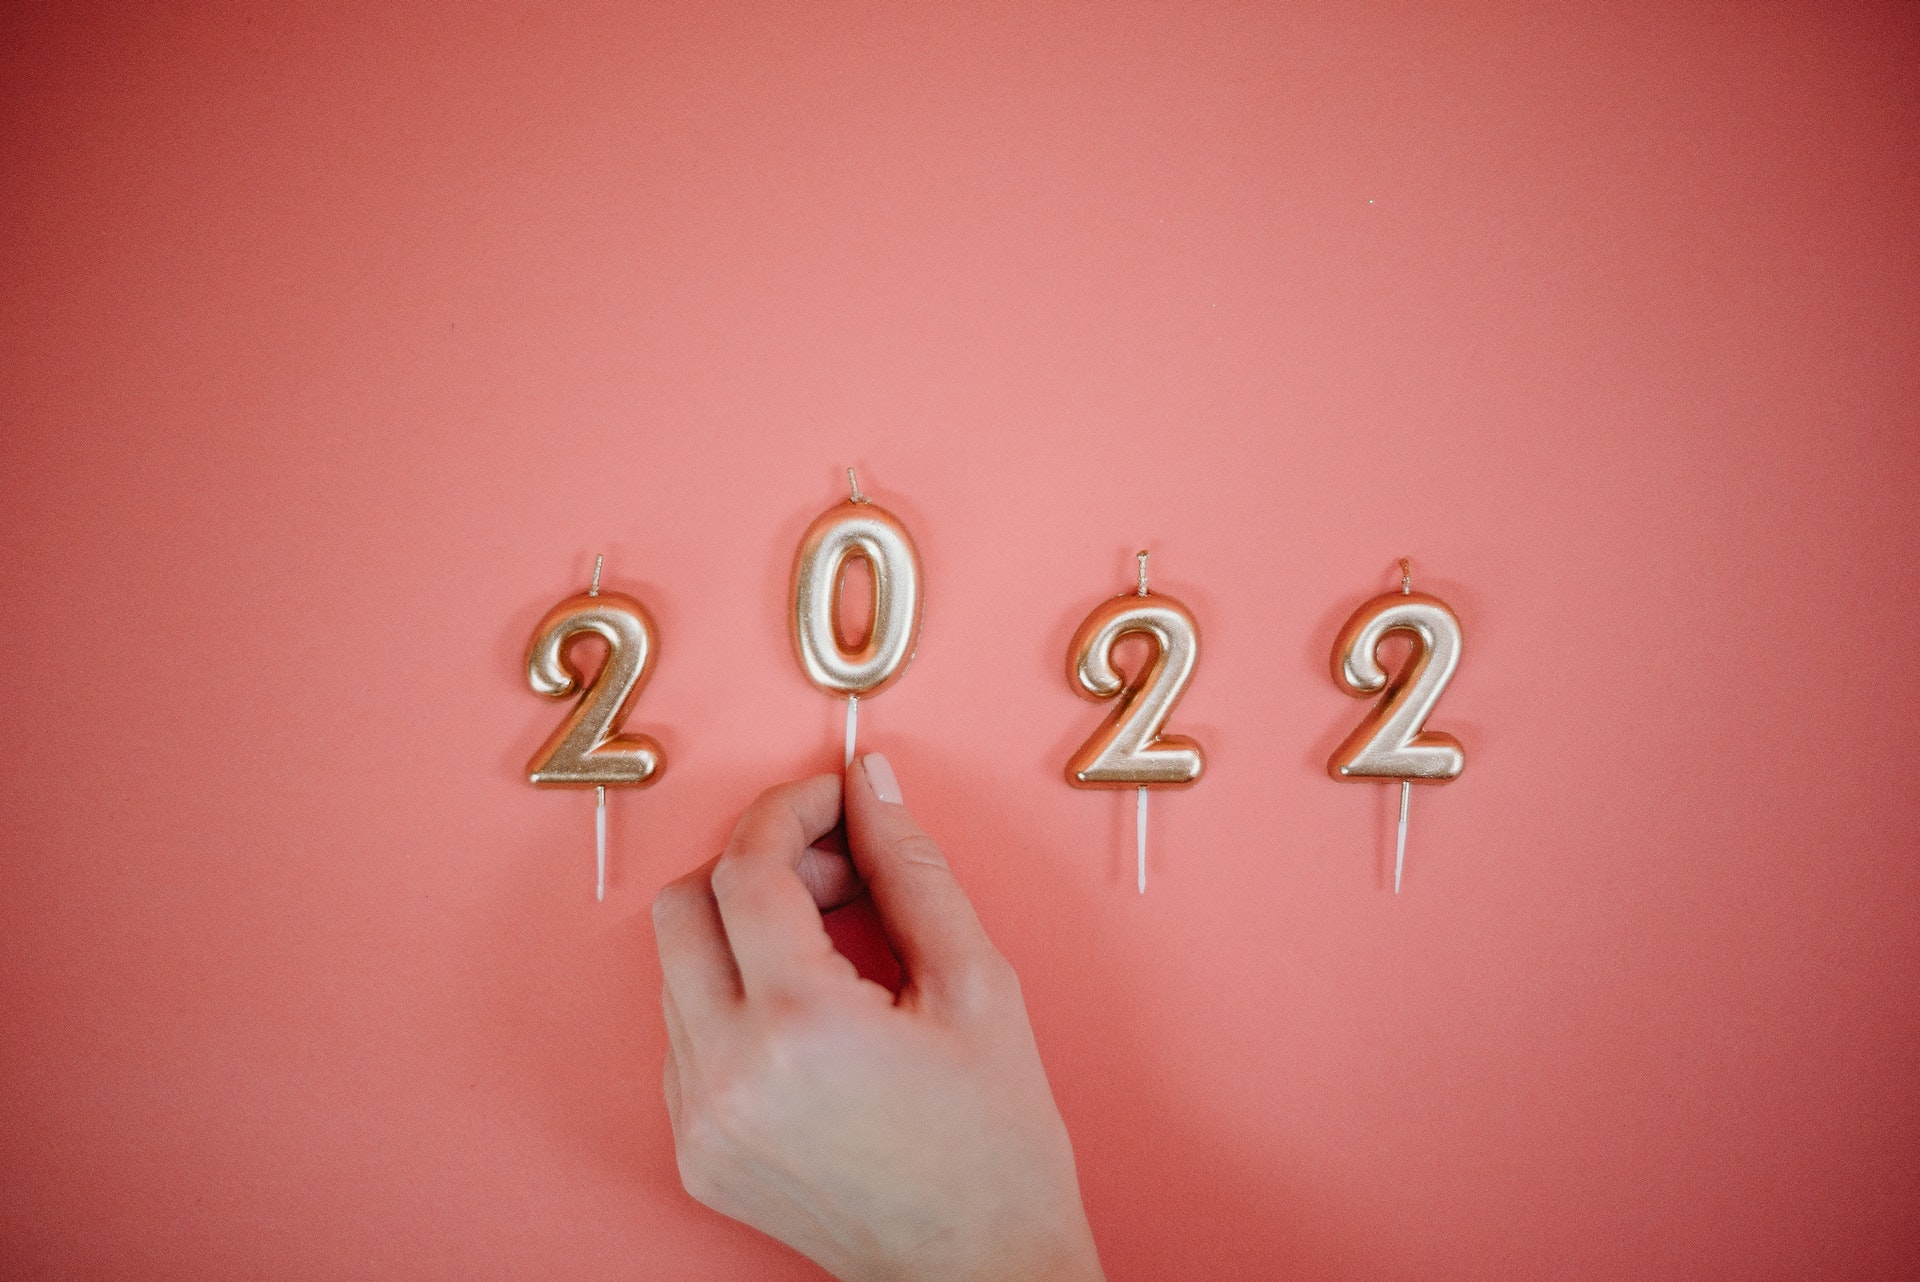 How to Plan for A Better Year in 2022